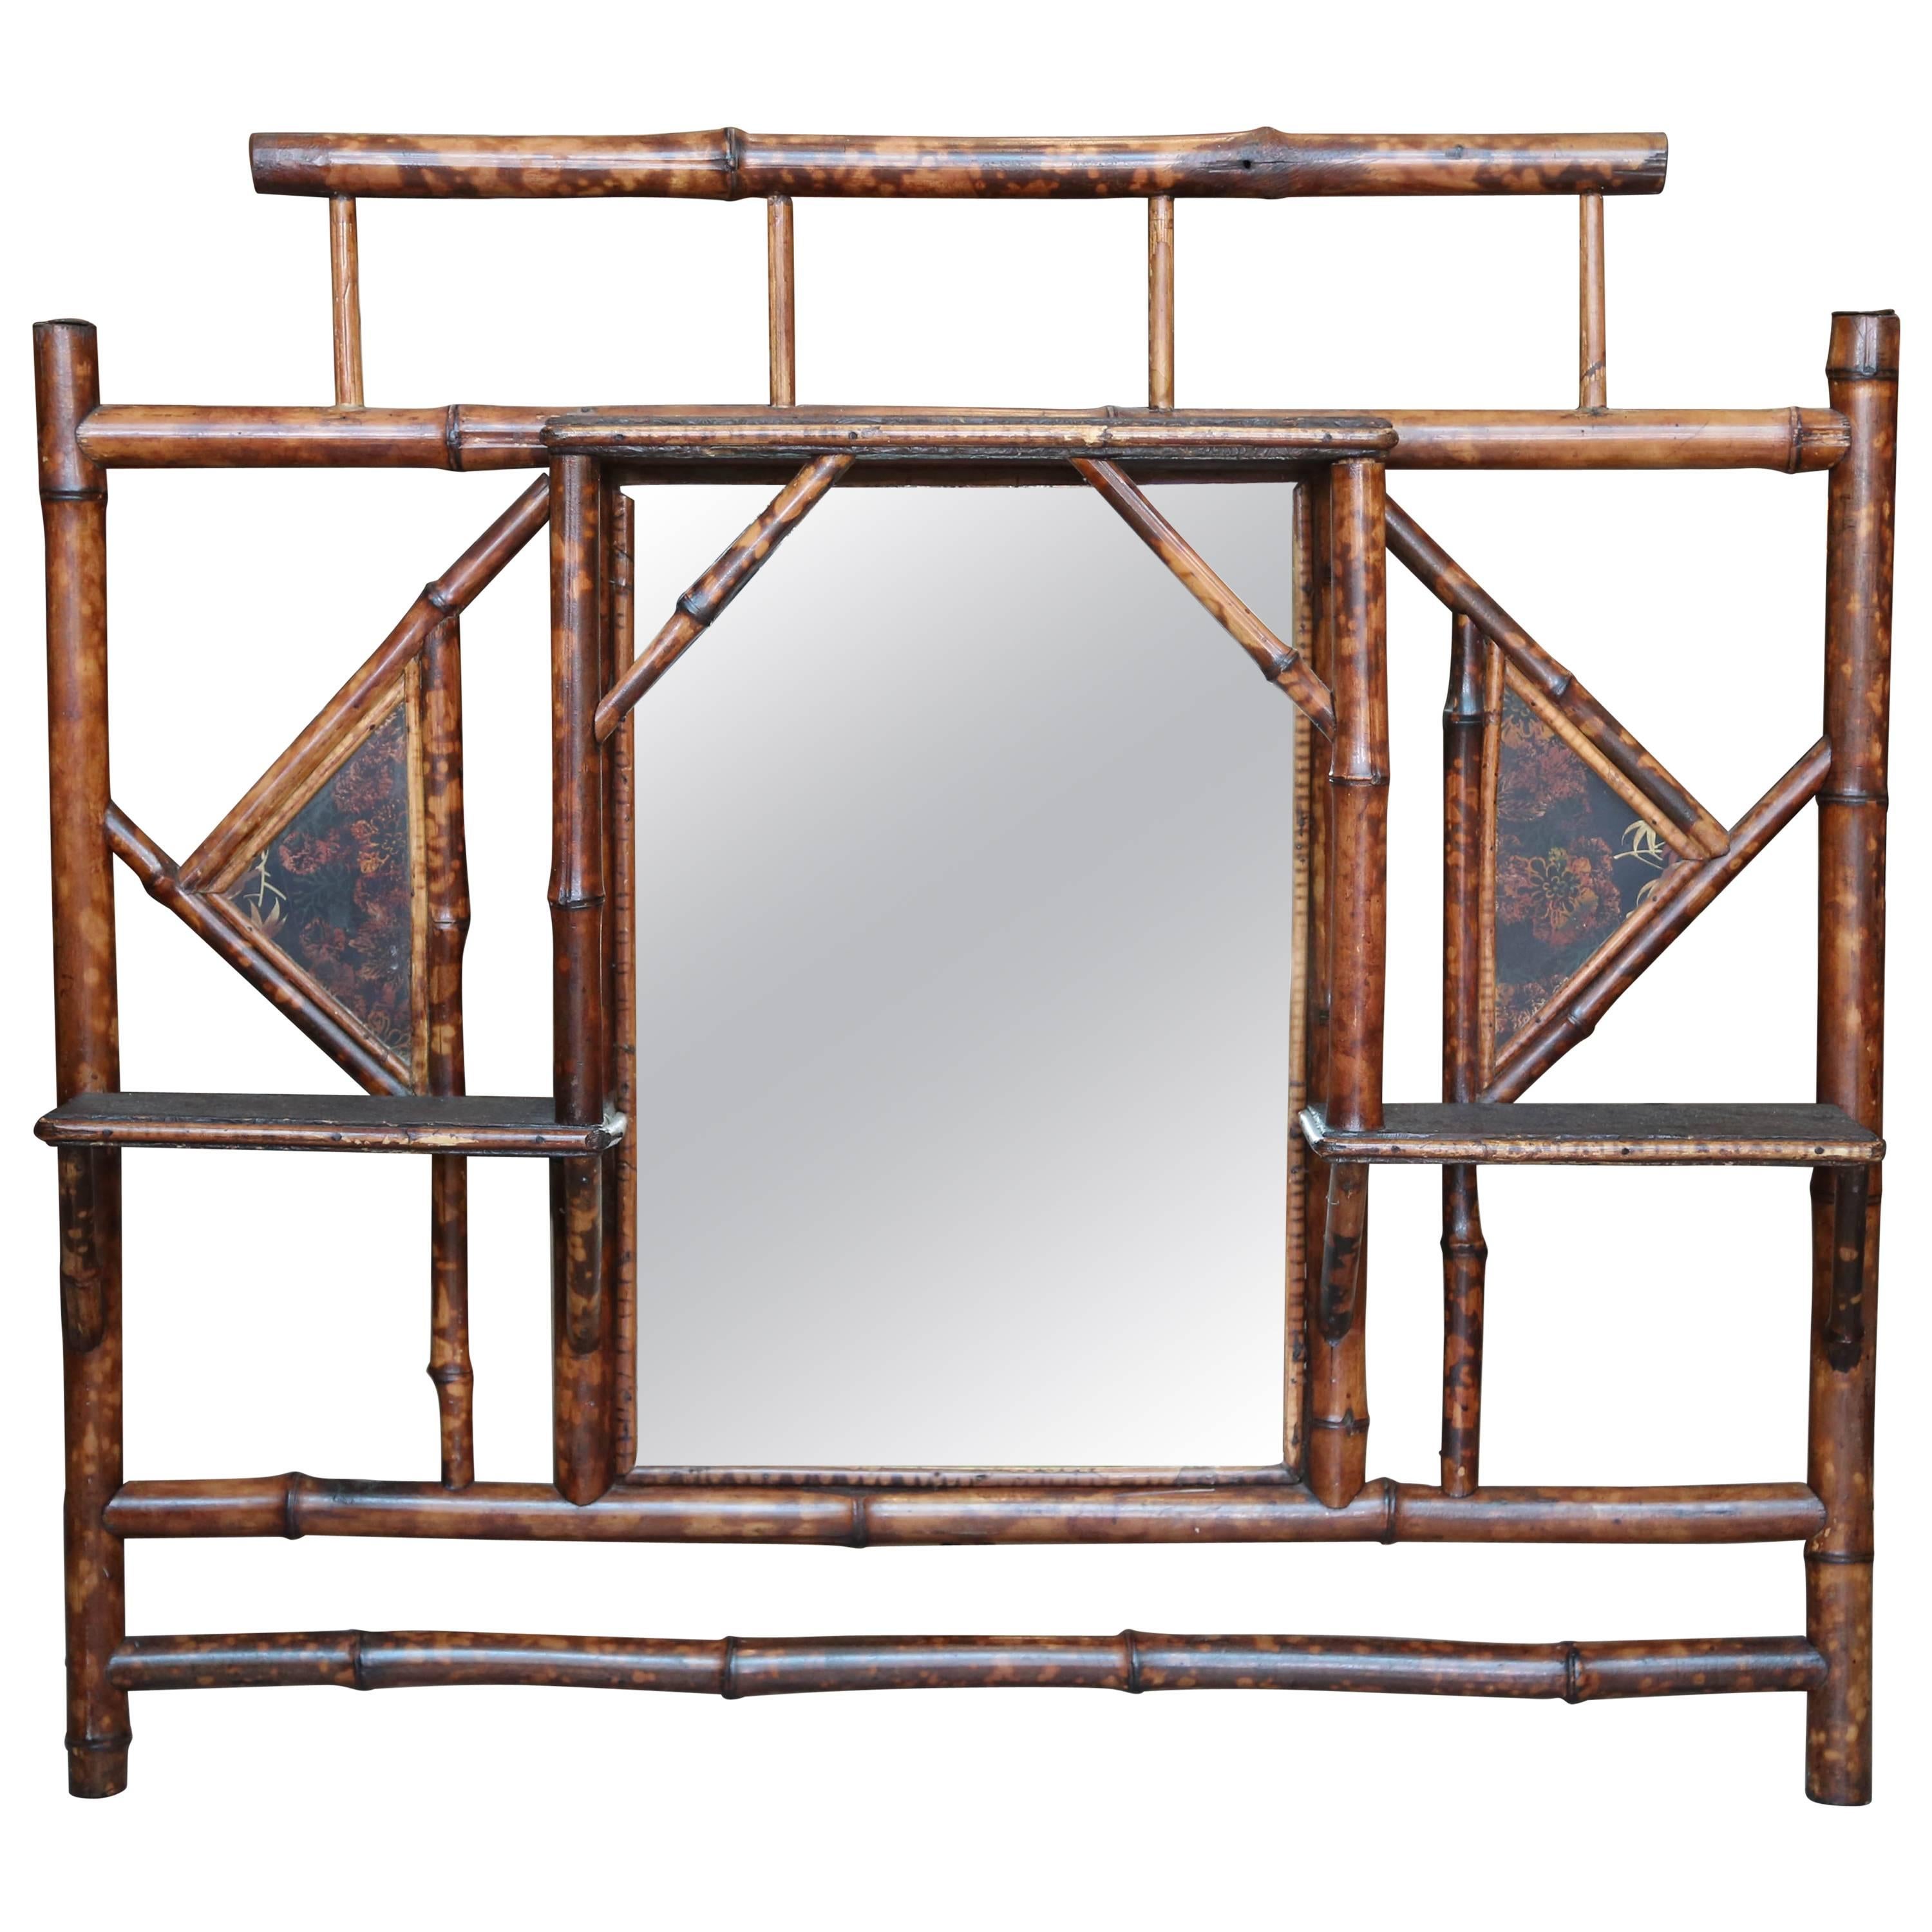 19th Century English Lacquer Bamboo Overmantel Mirror